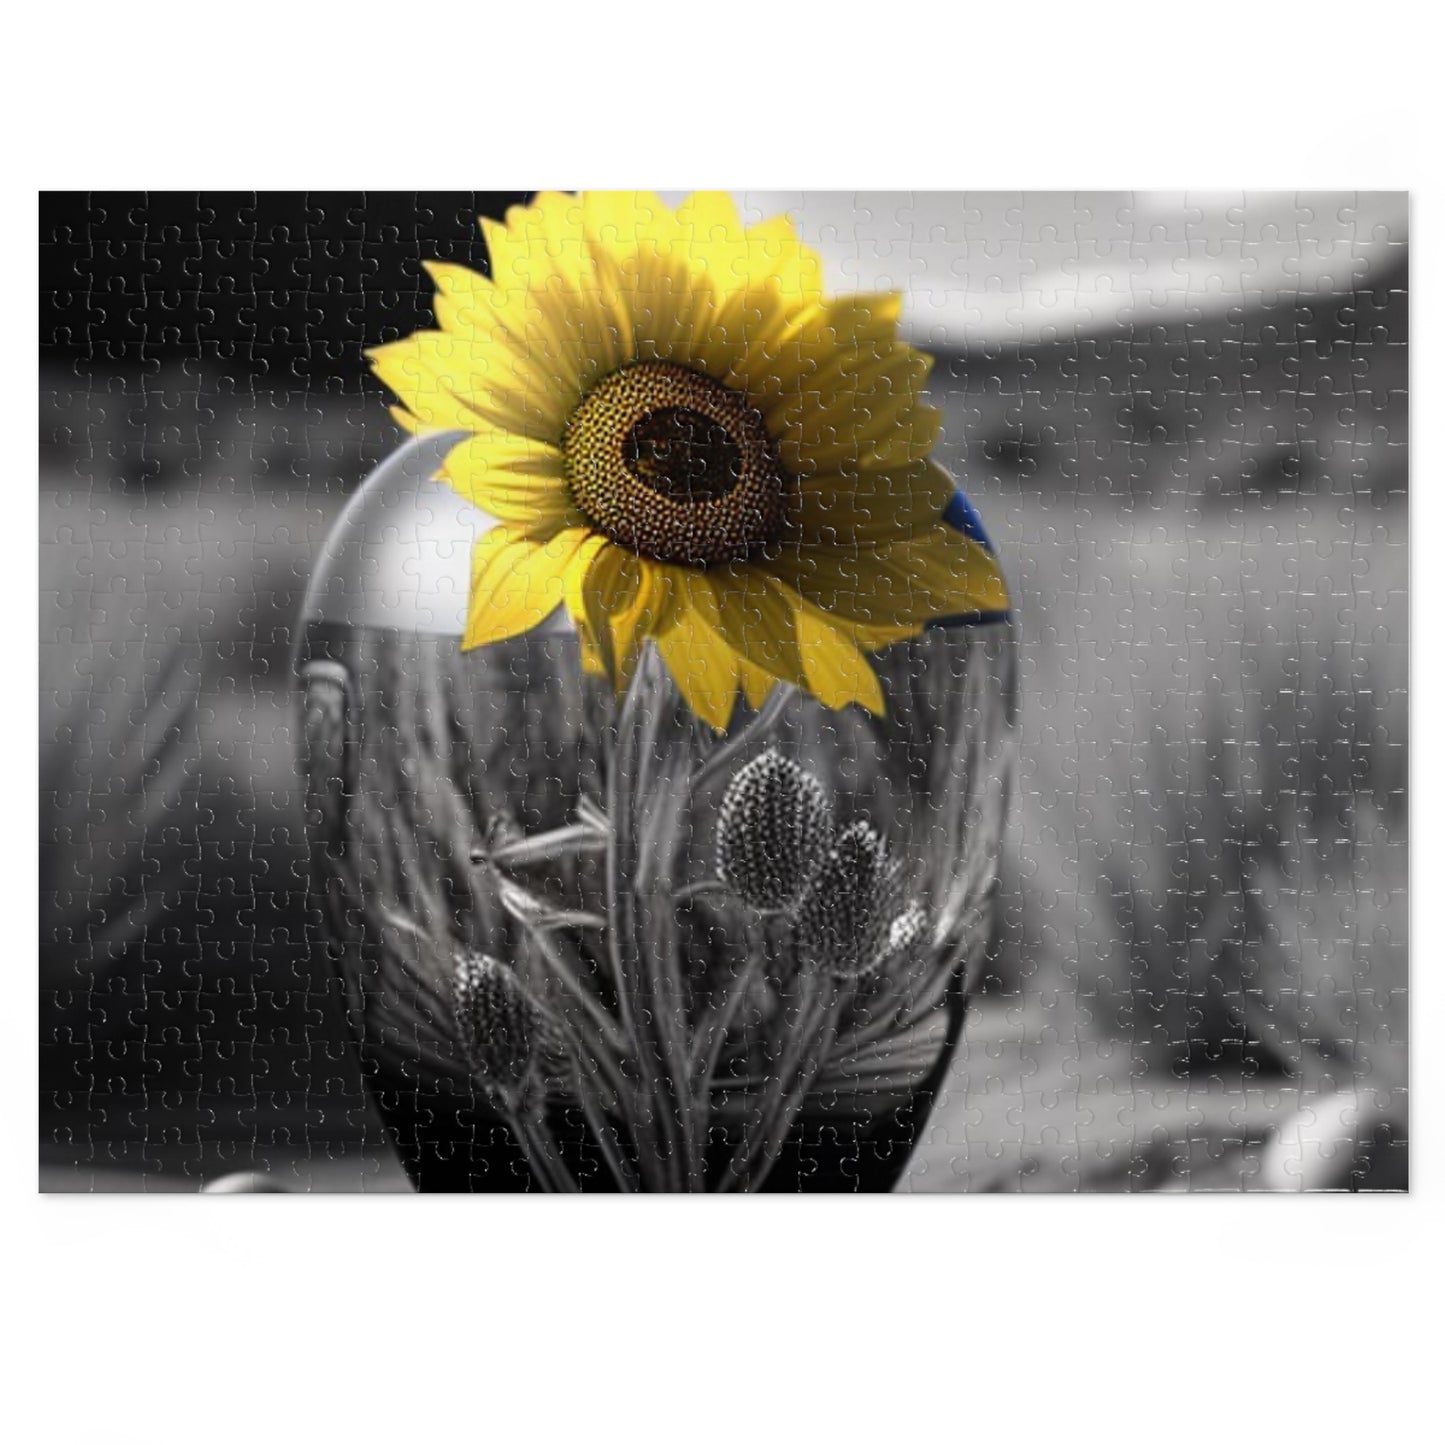 Jigsaw Puzzle (30, 110, 252, 500,1000-Piece) Yellw Sunflower in a vase 3